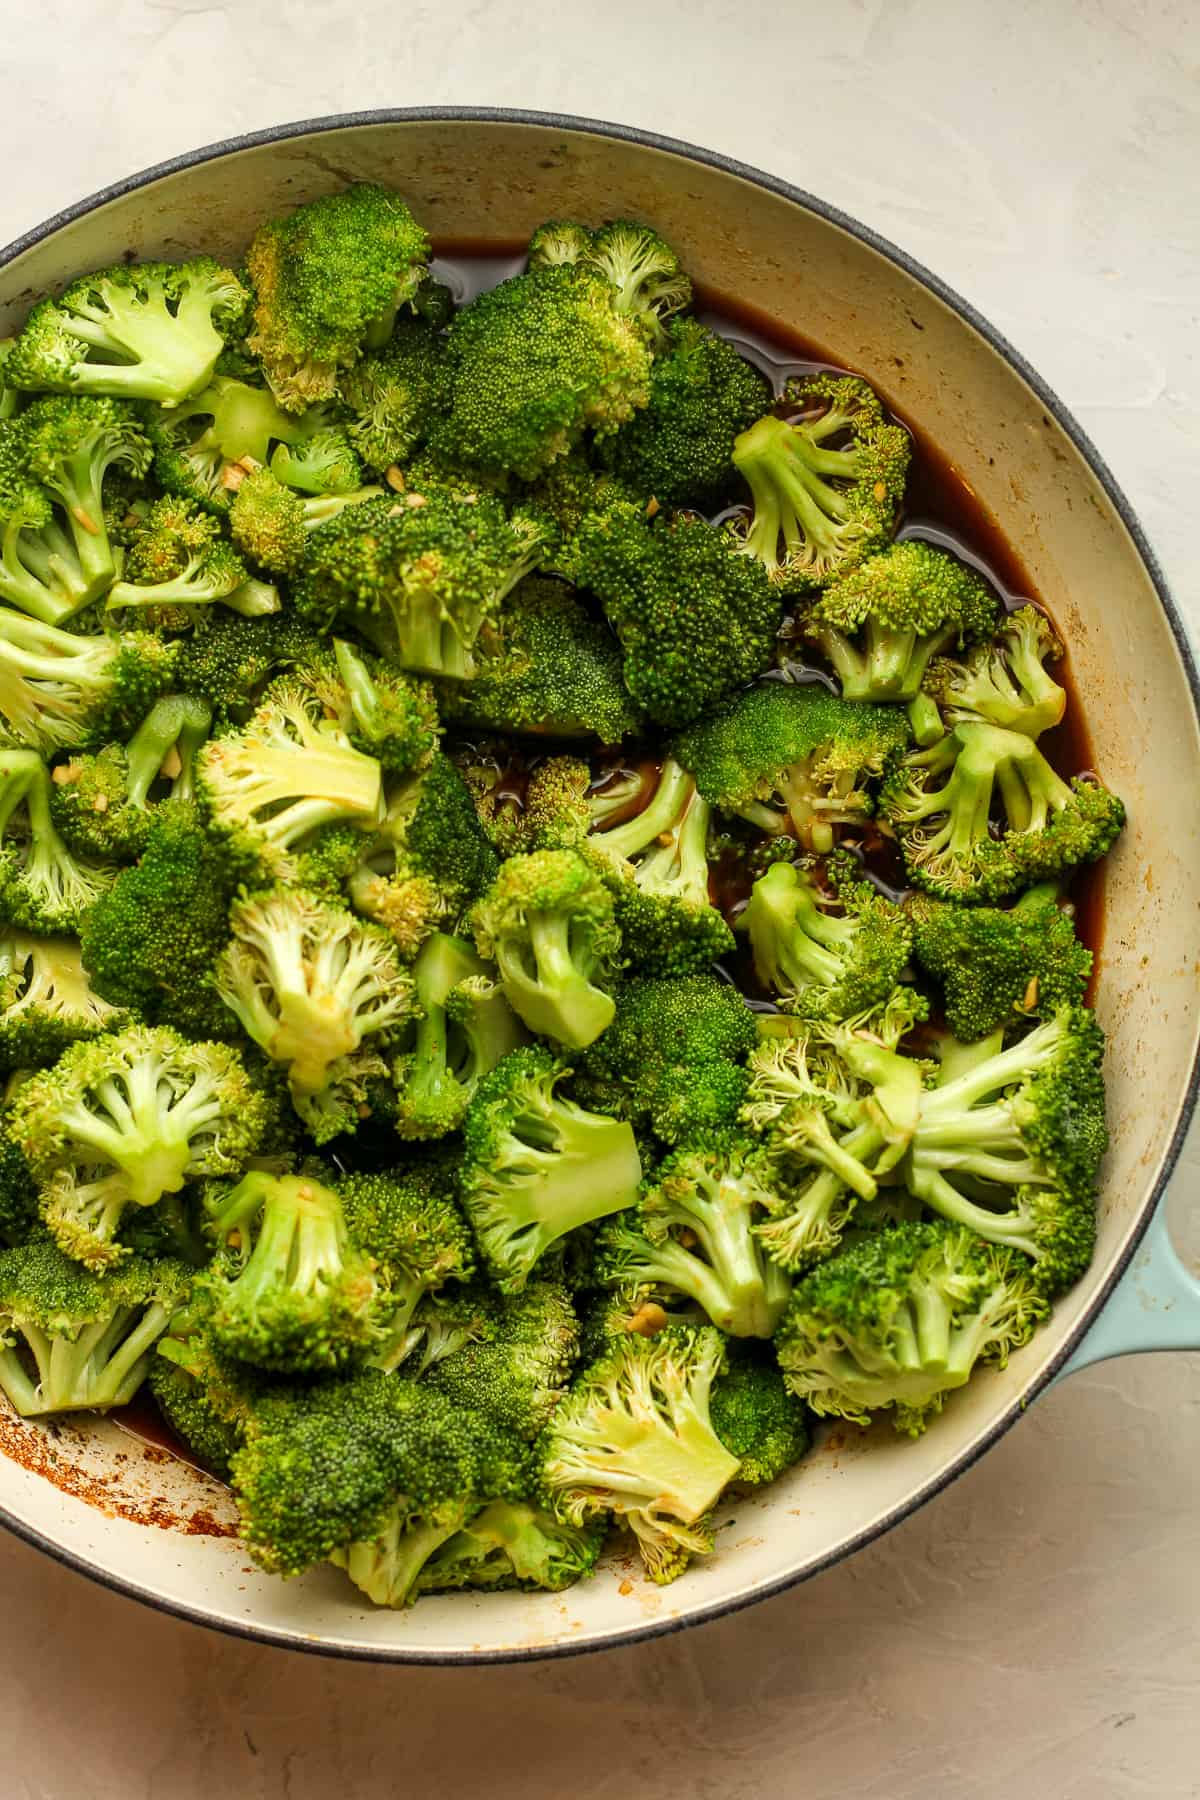 The broccoli and sauce in a pan.